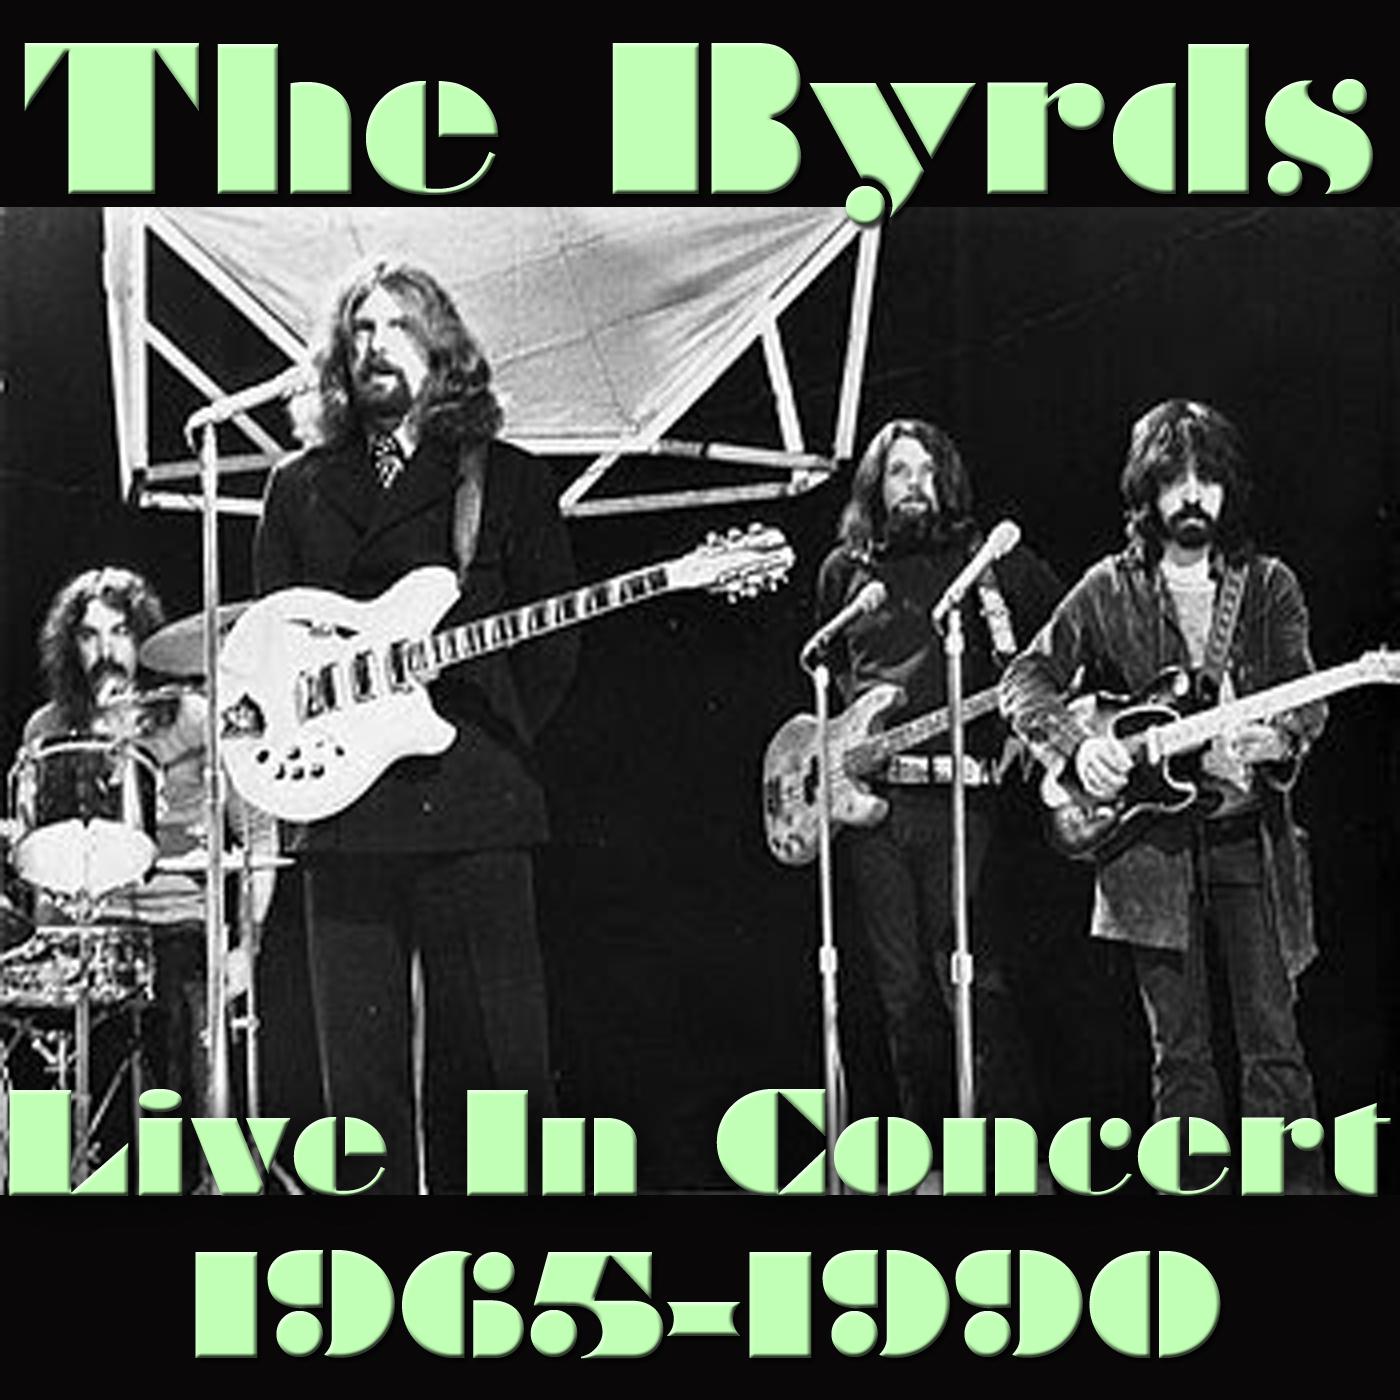 The Byrds; Live In Concert 1965-1990 (Live)